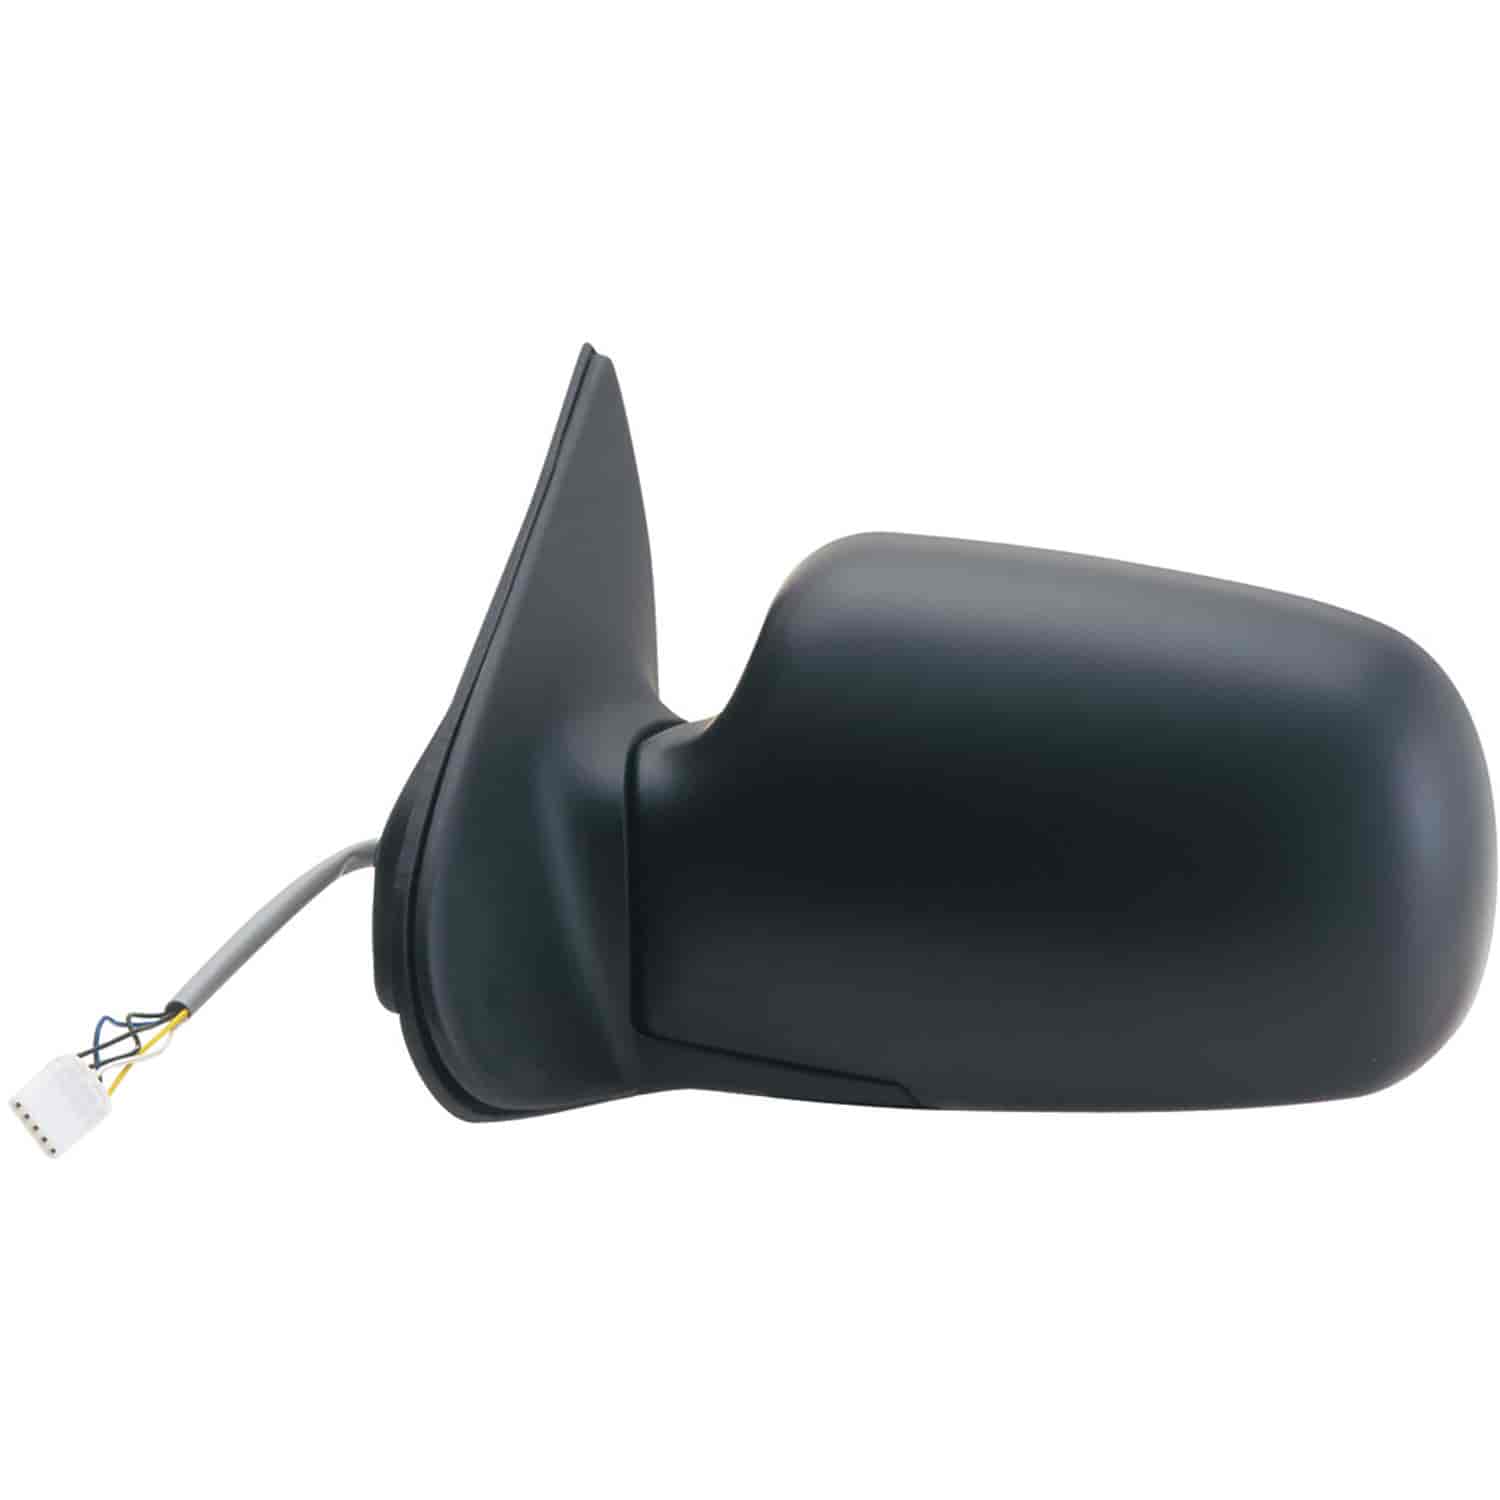 OEM Style Replacement mirror for 96-98 Mercury Villager; Nissan Quest driver side mirror tested to f